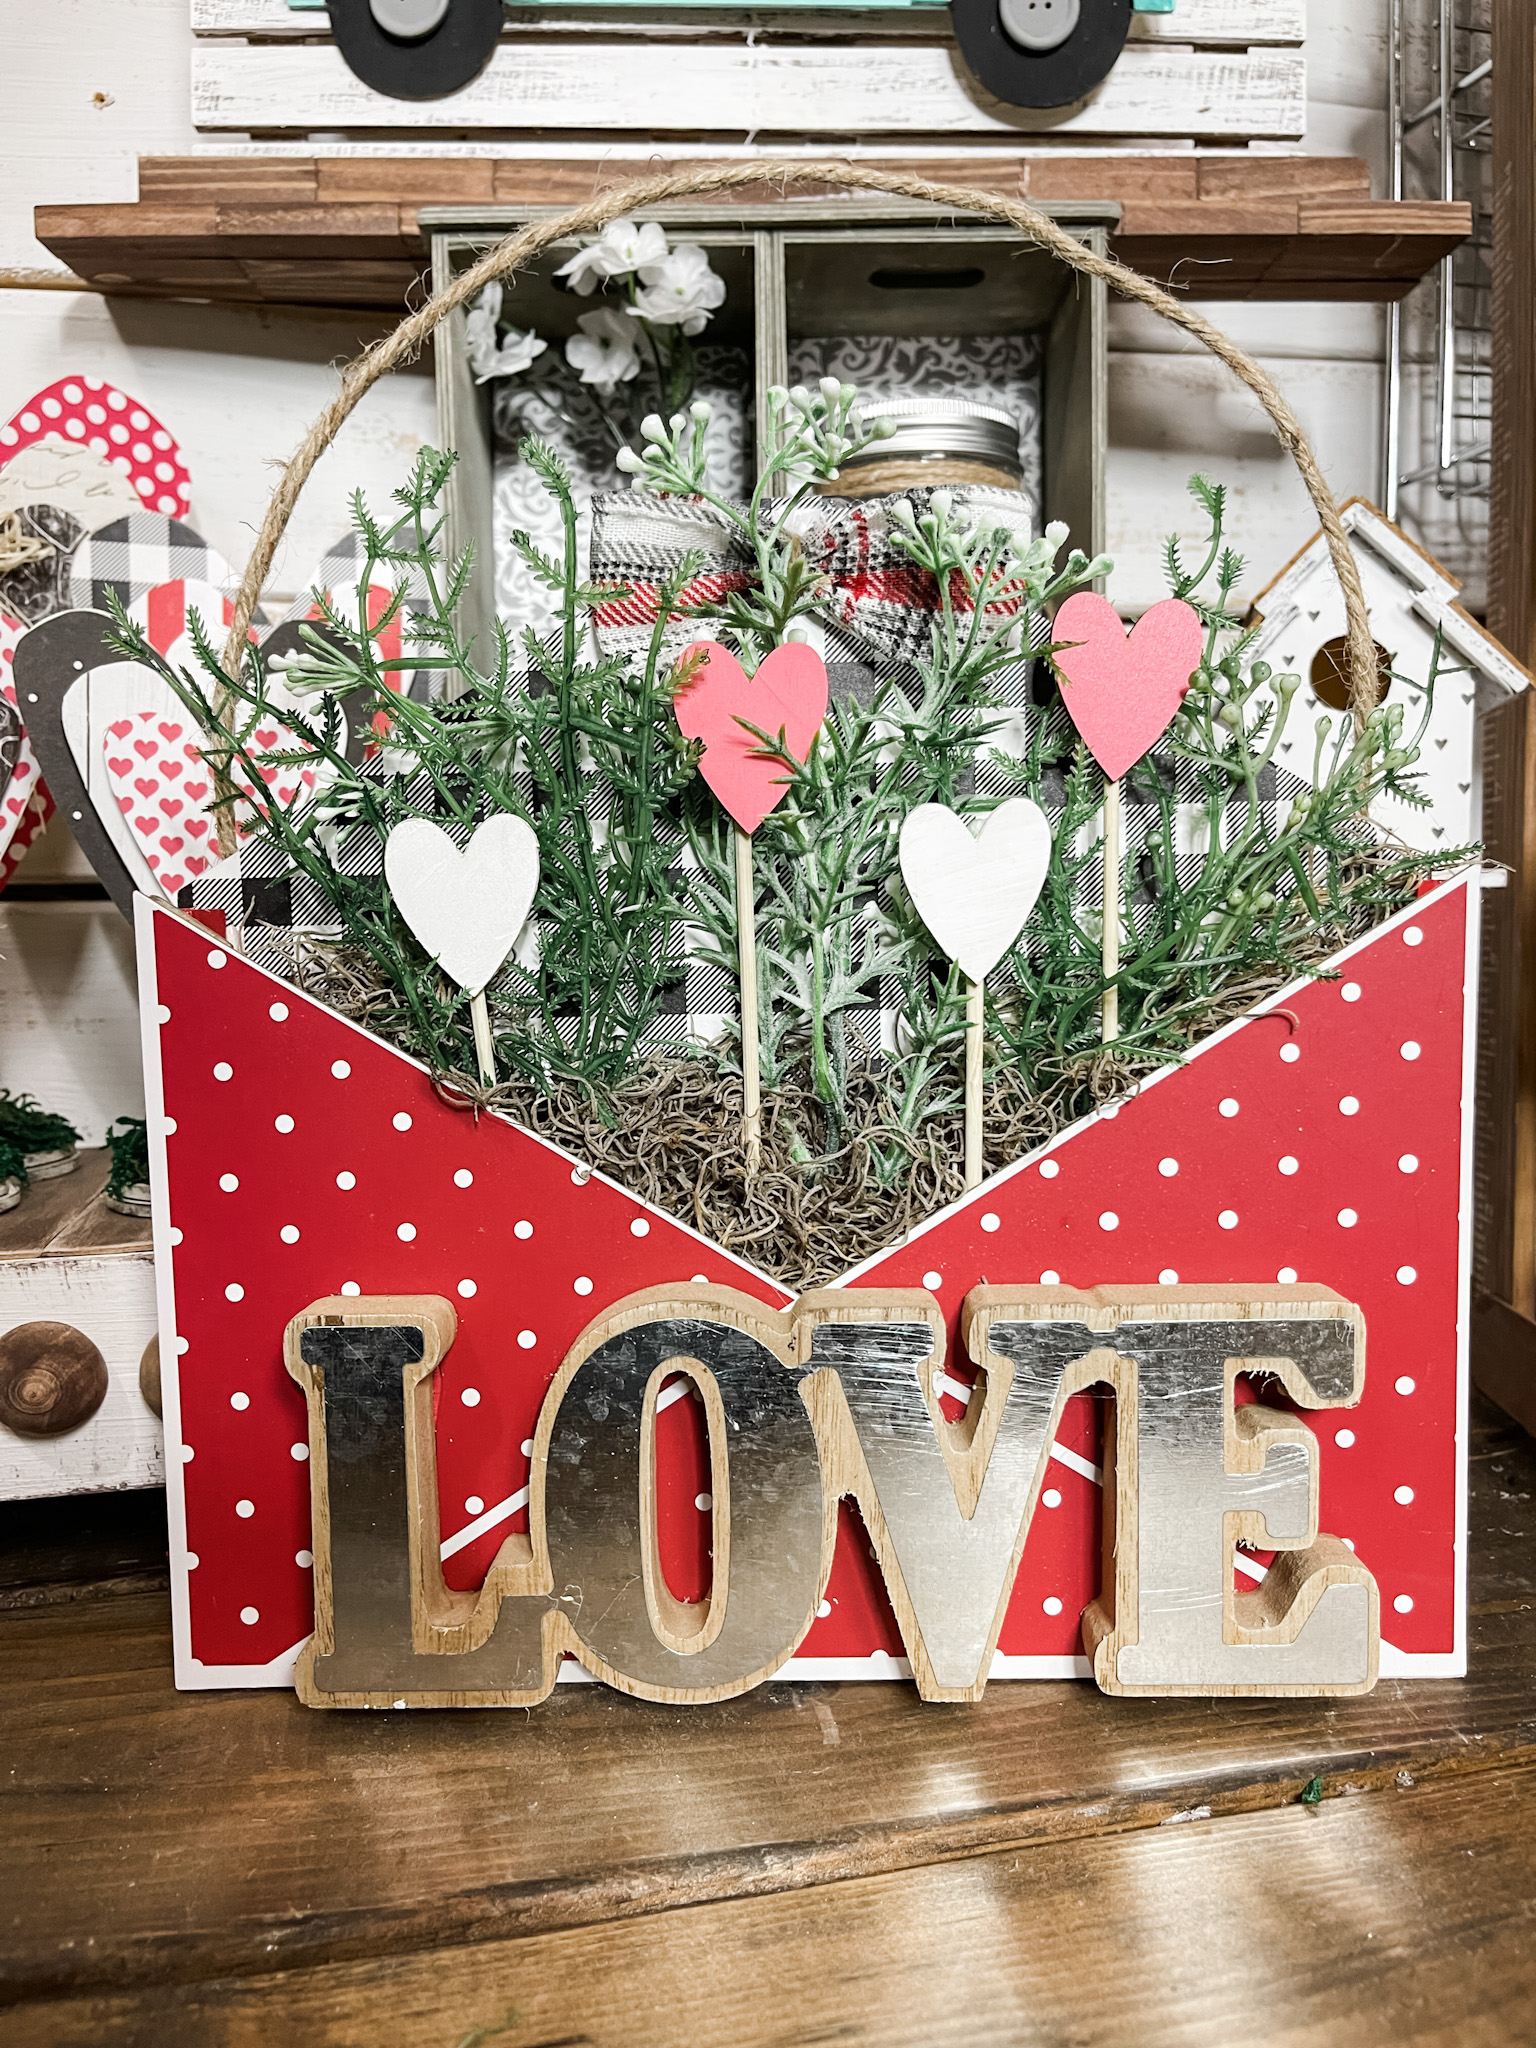 21 Last Minute DIY Valentines Day Decorations That Are Super Easy & Cheap   Diy valentine's day decorations, Valentines day decorations, Diy valentines  decorations